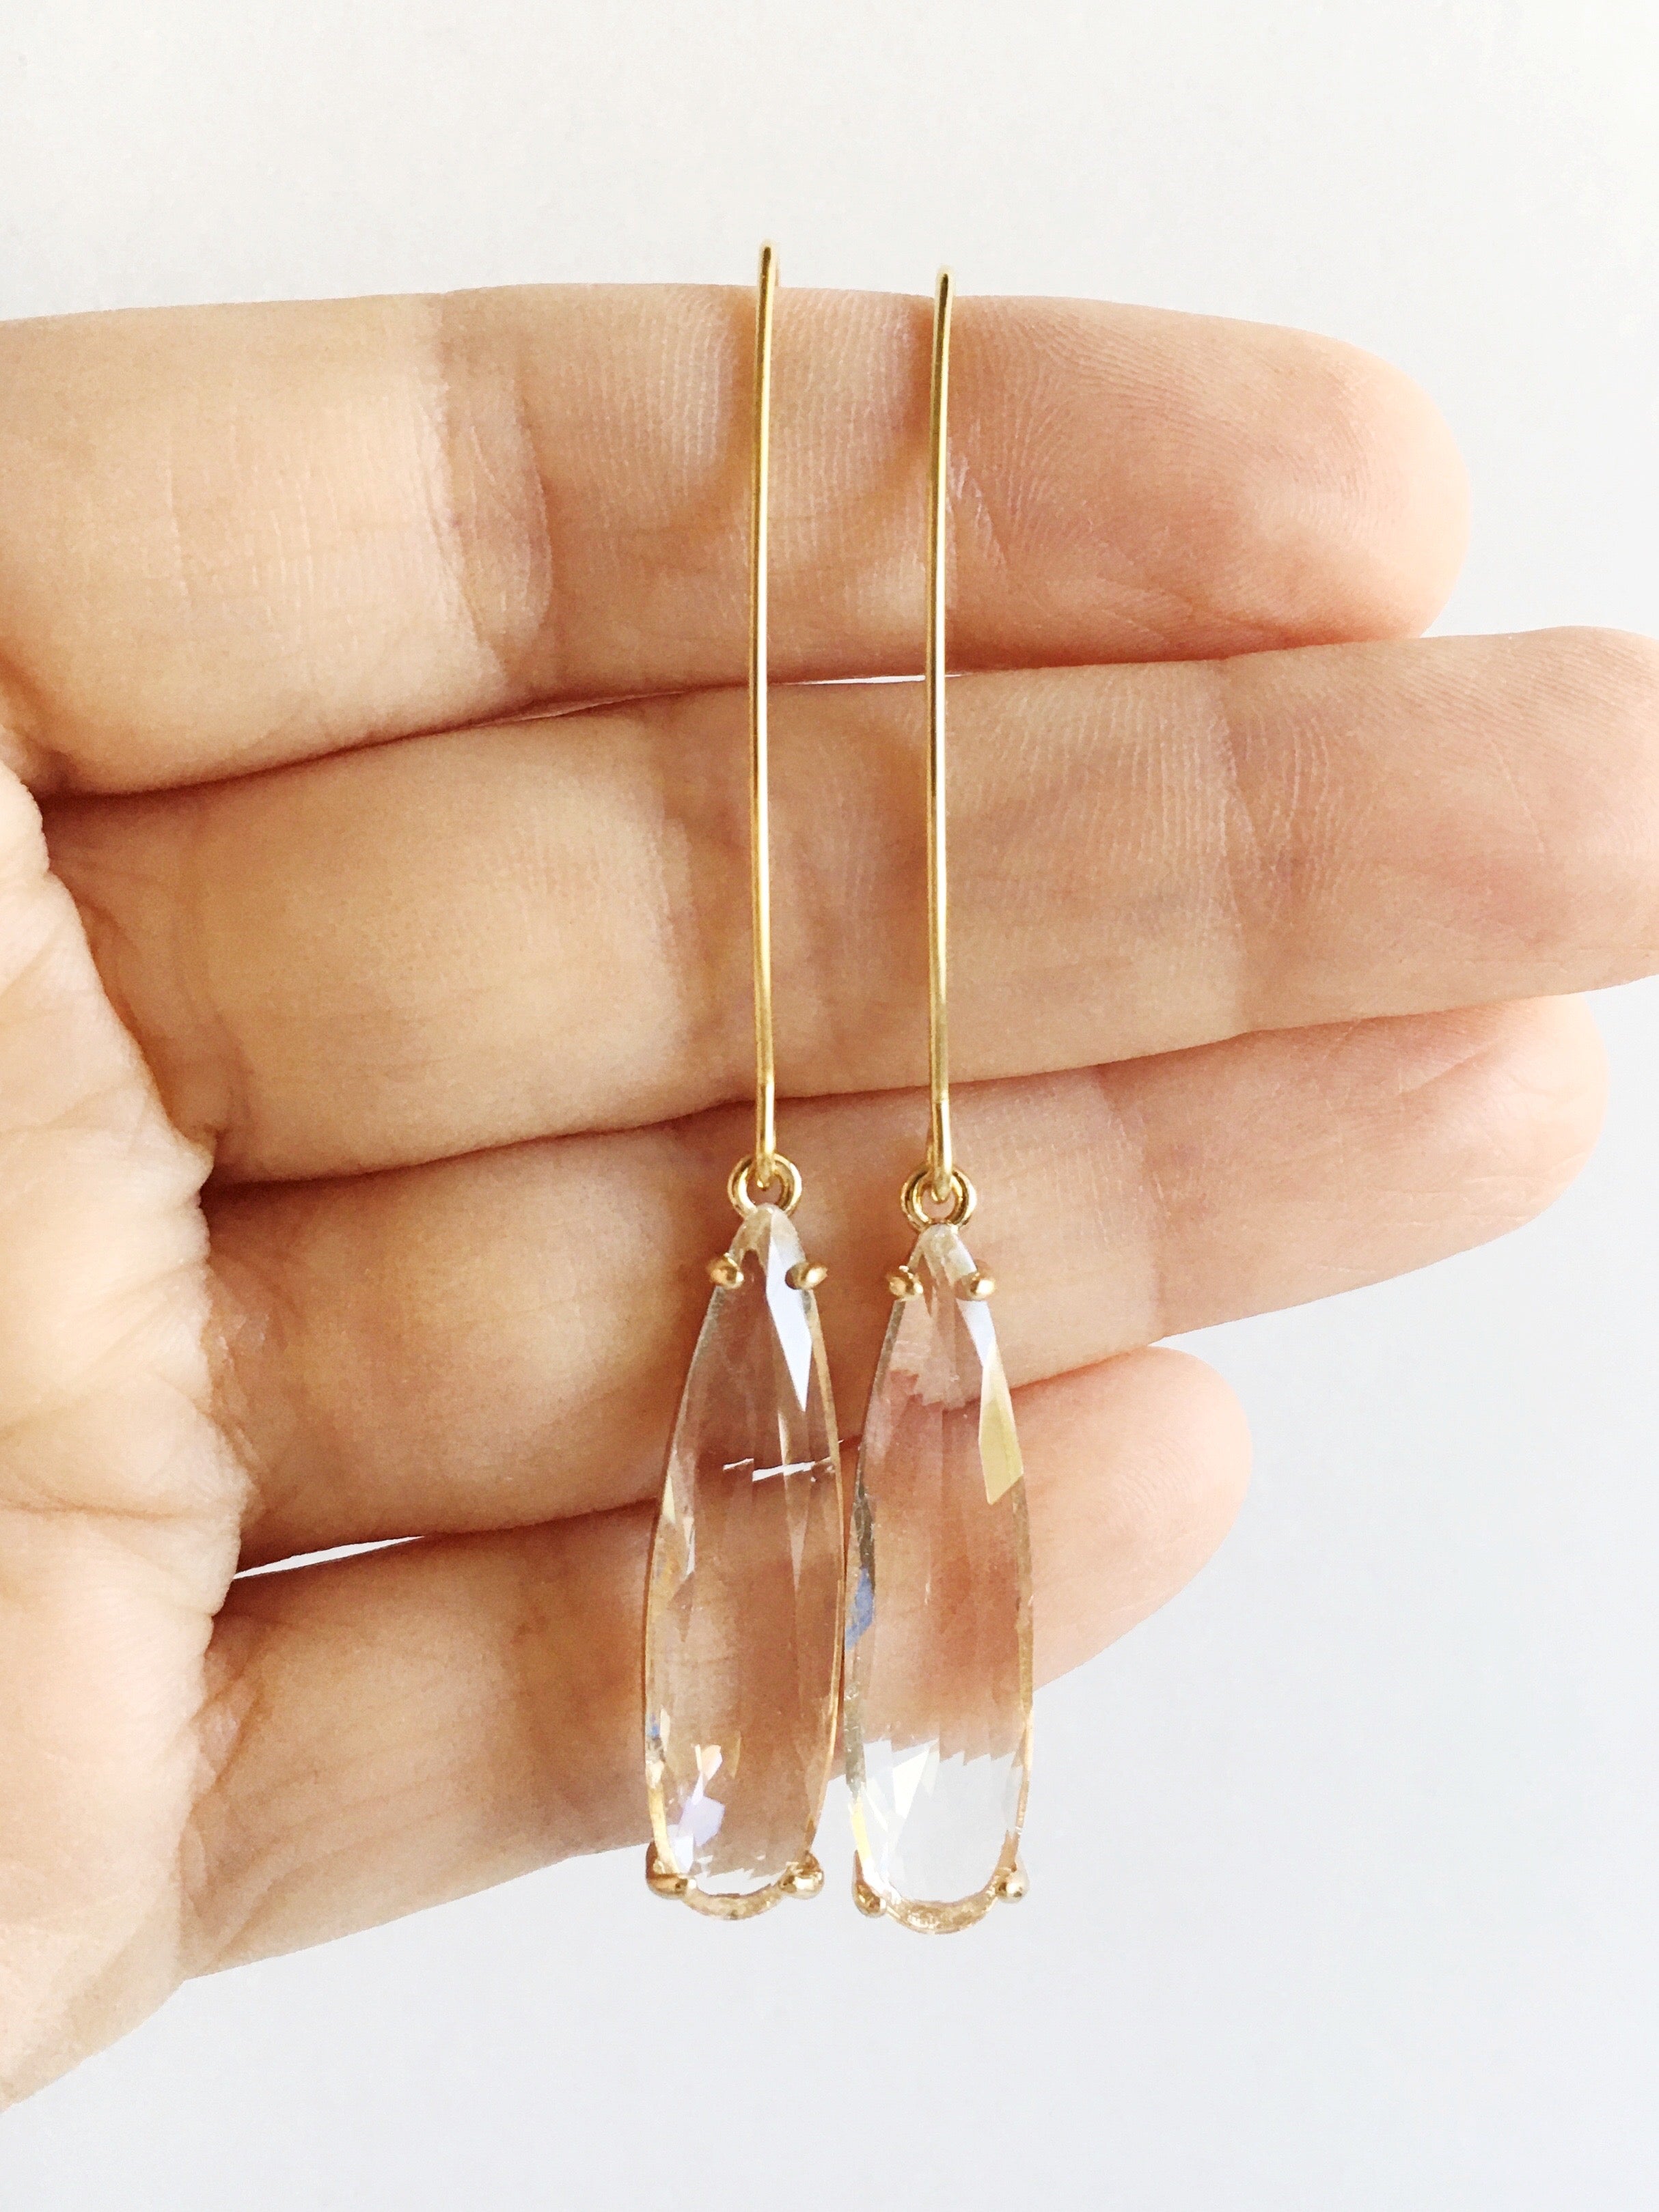 Crystal clear Glass Teardrop and Gold Long Dangle Earrings hanging from women's fingers